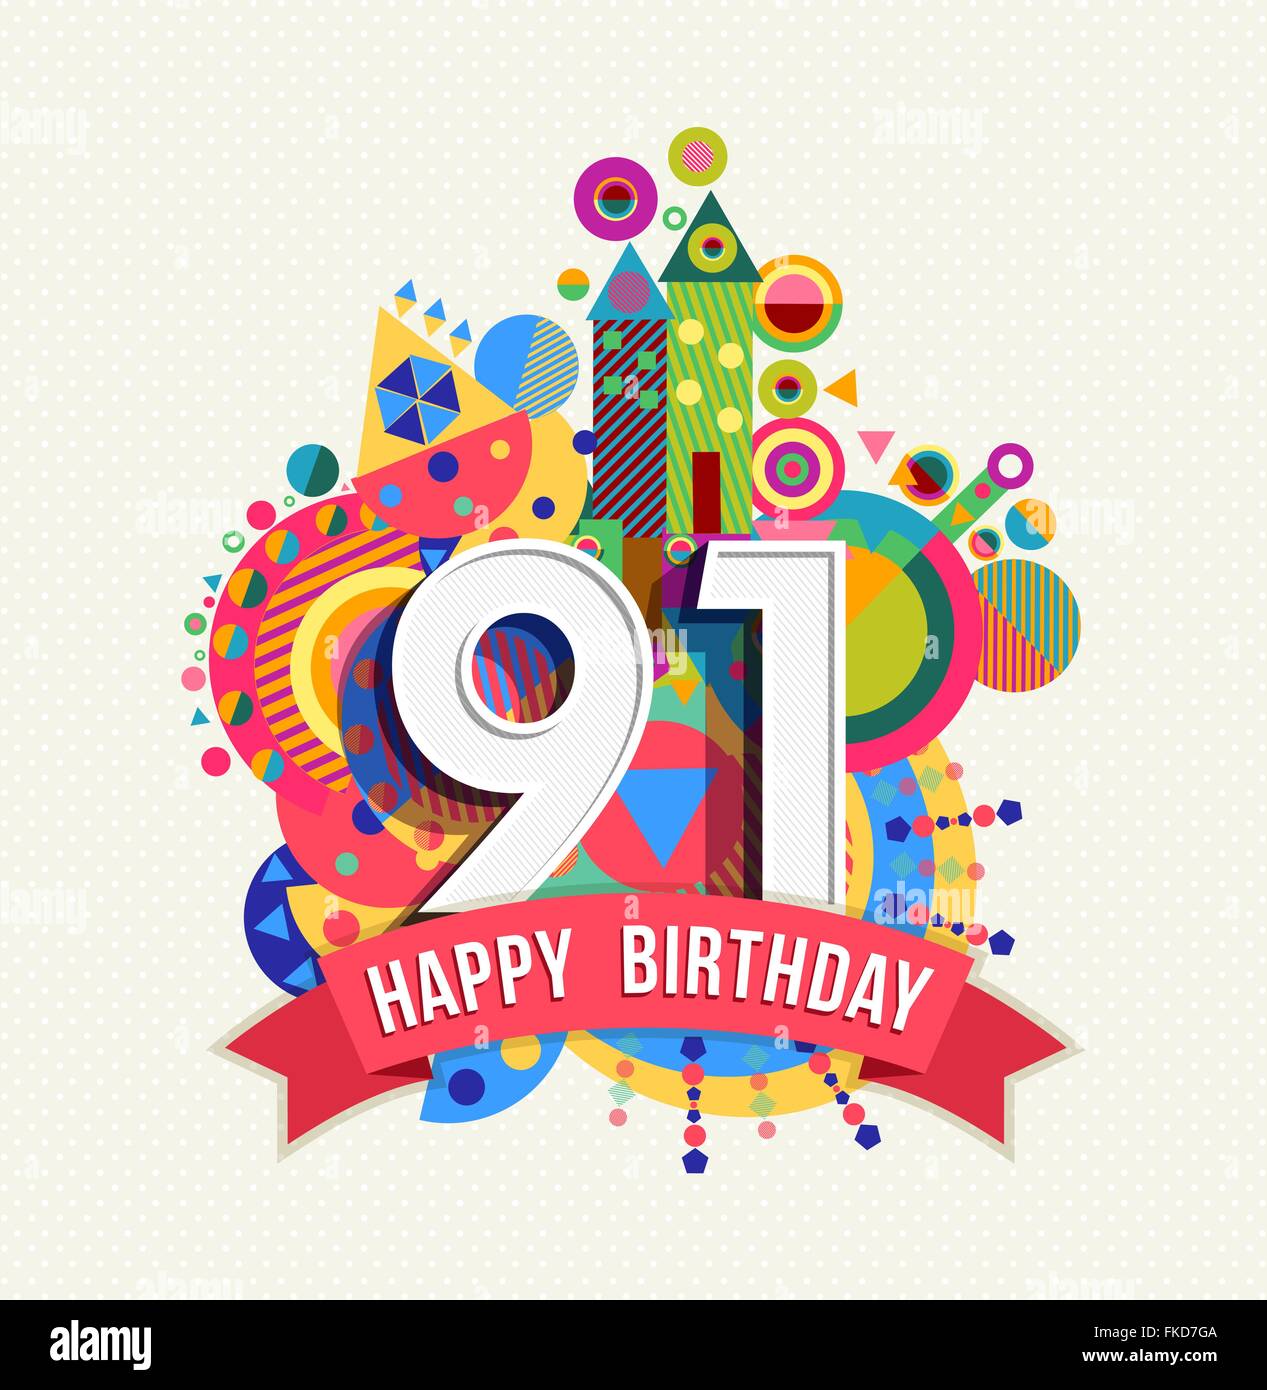 Happy Birthday ninety one 91 year, fun celebration anniversary greeting card with number, text label and colorful geometry Stock Vector